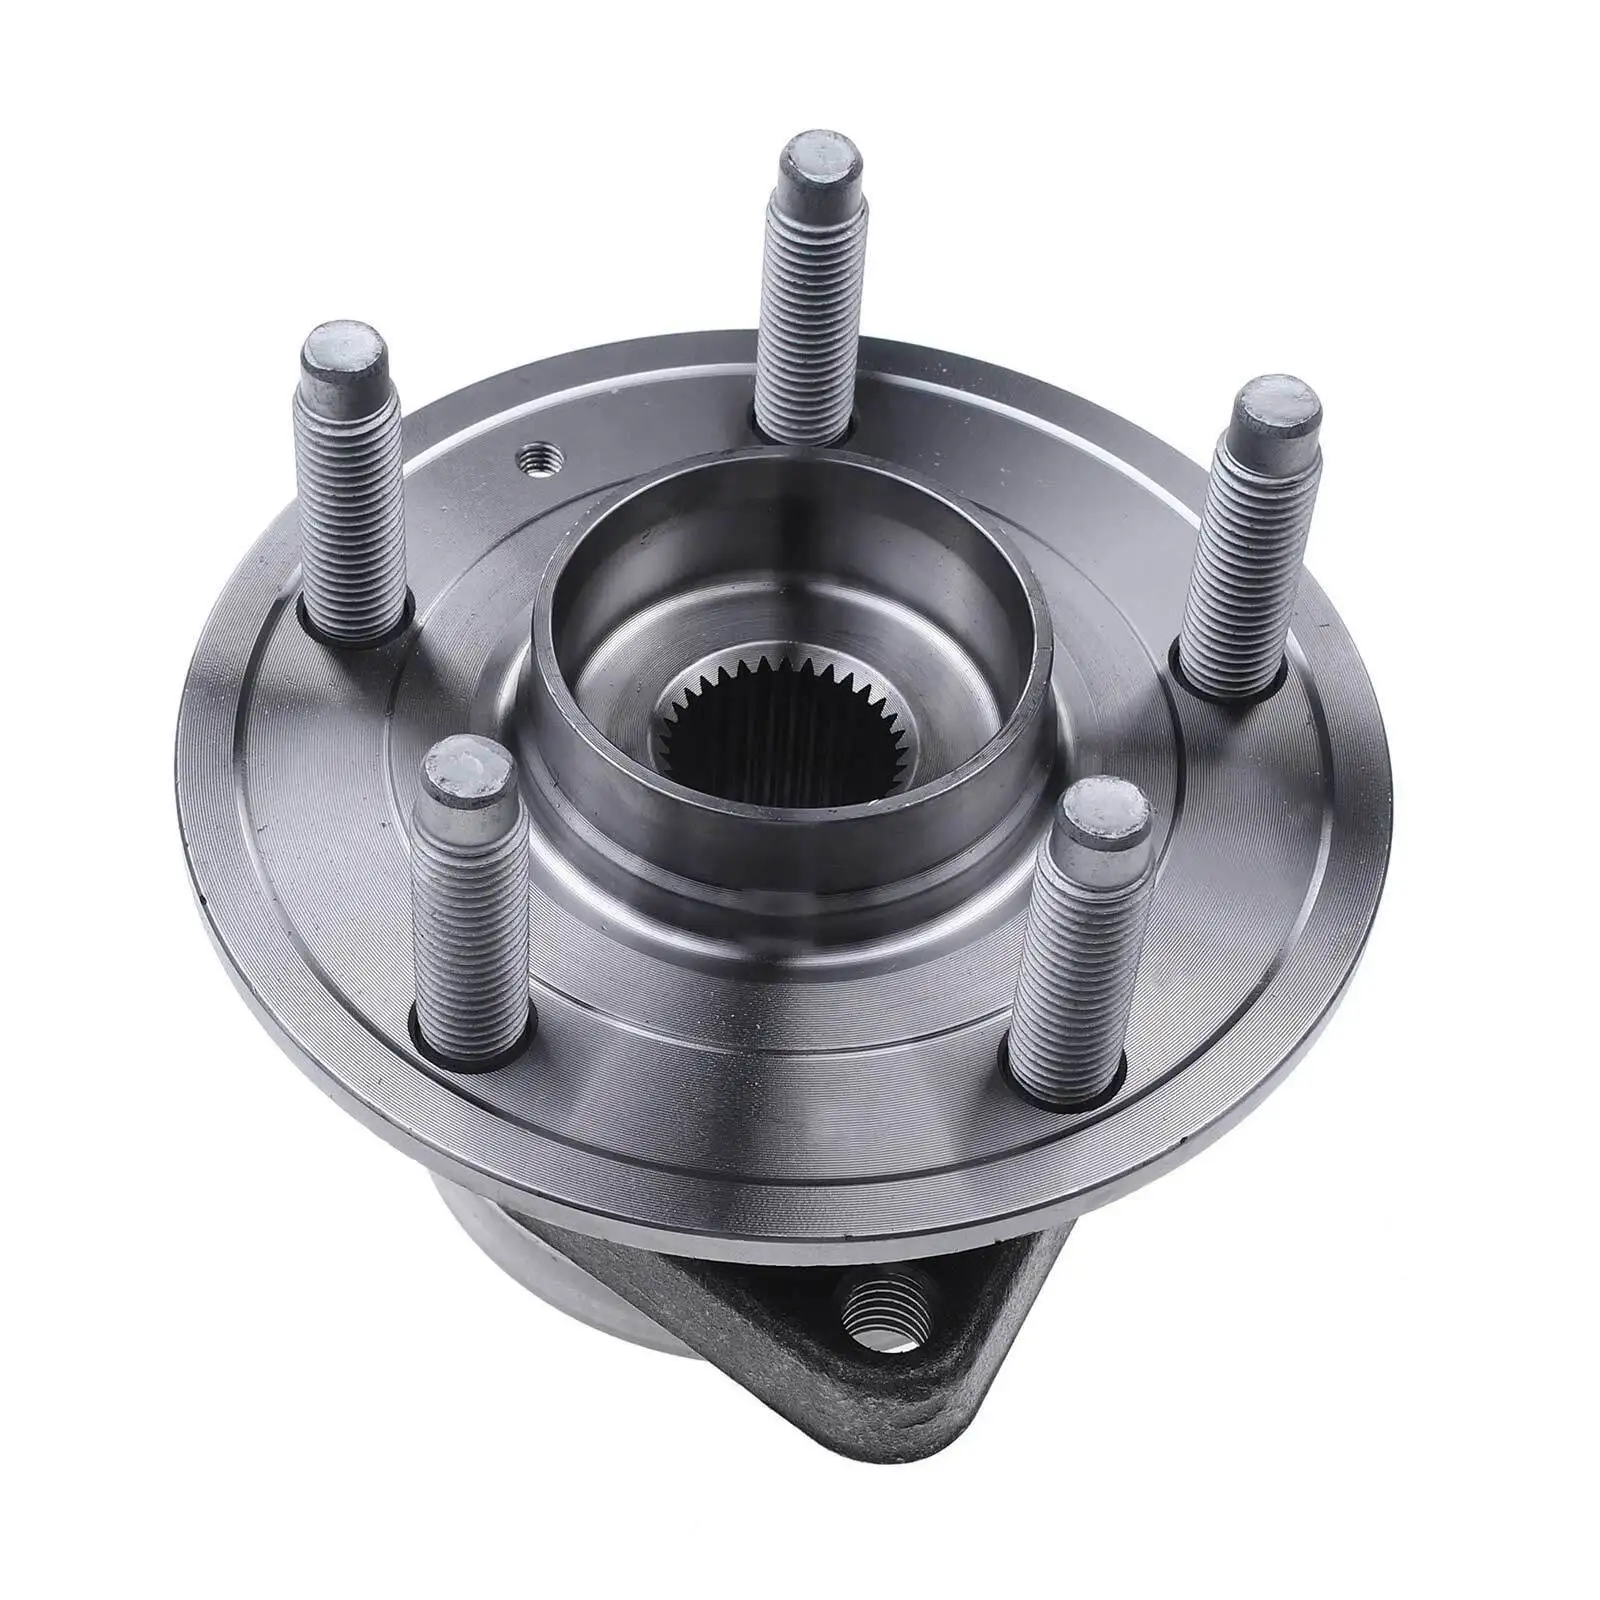 

A3 Repair Shop 2x Front Left & Right Wheel Hub Bearing Assembly for Chevrolet Cruze 2016-2019